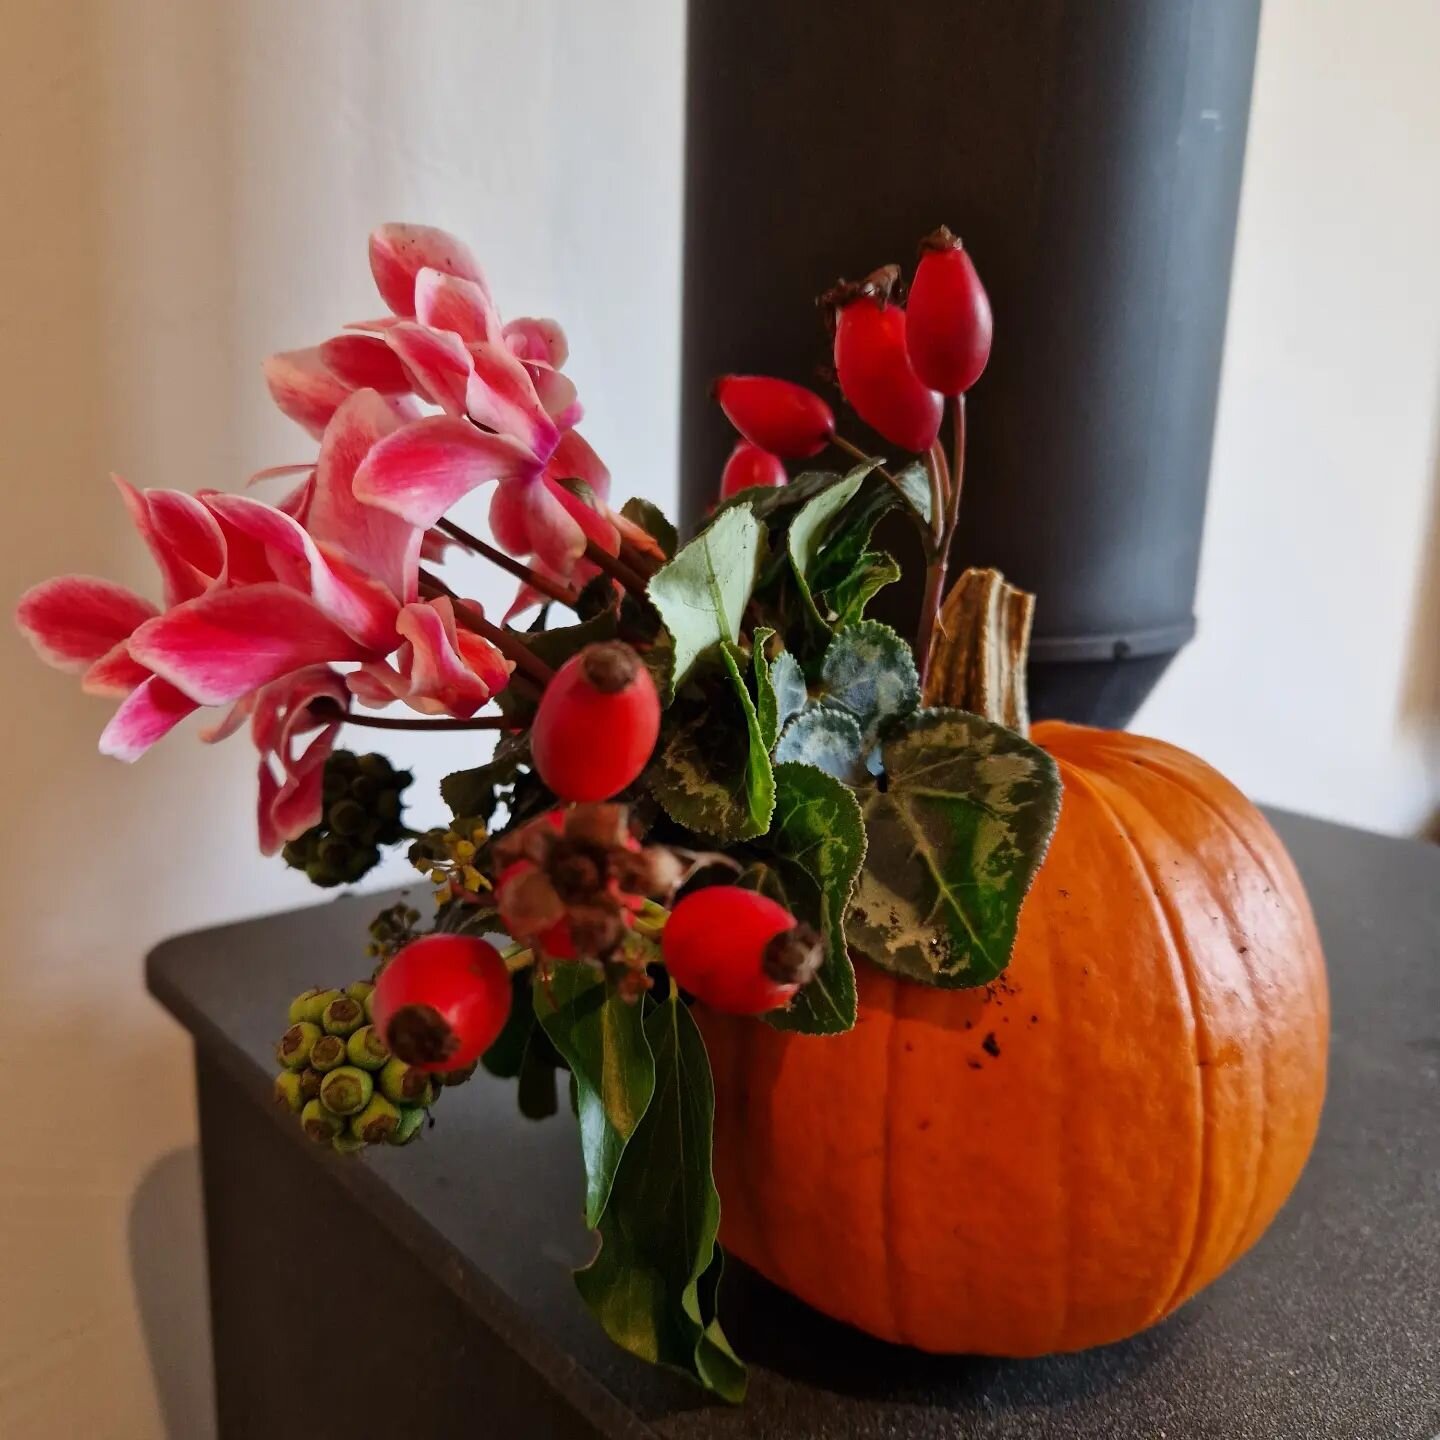 Feeling bit creative today and wanted to make a little seasonal treat for my lovely mum who is stuck indoors at the moment. Bought the pumpkin and the cyclamen, then a little bit of hedgerow foraging for the rest. Brought a smile to mum's face xx